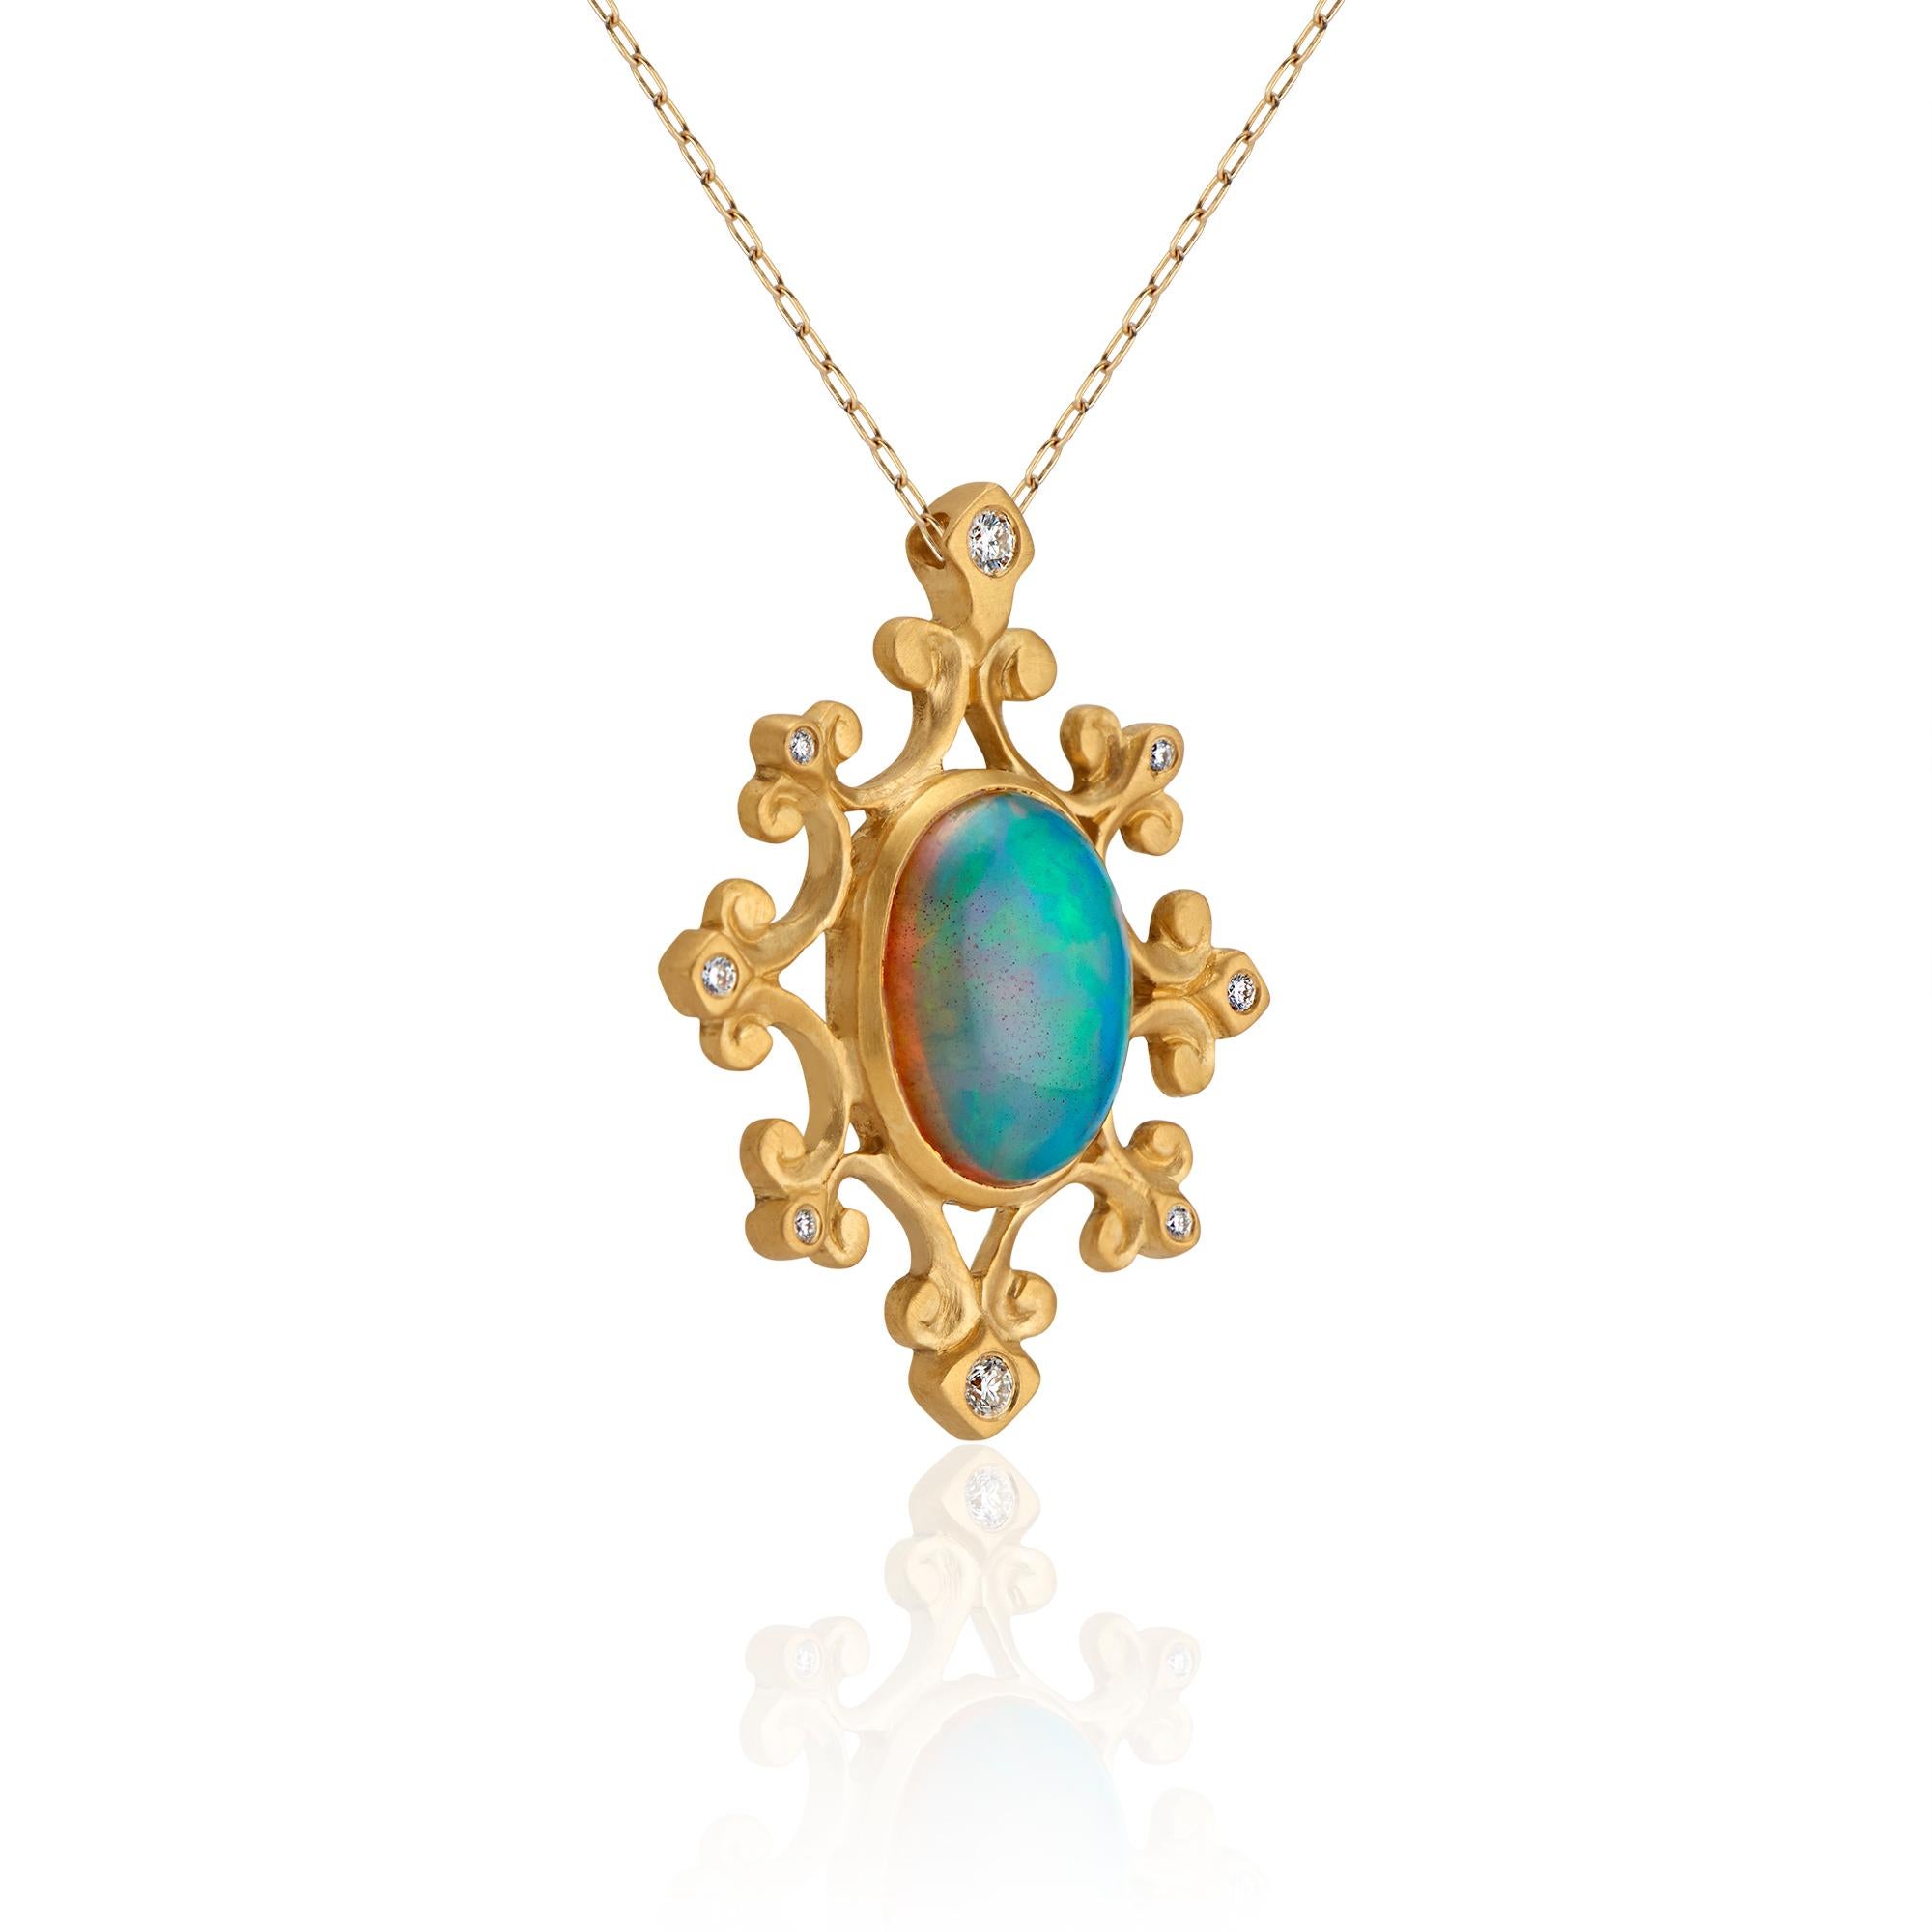 A 22k gold medallion, centered with a .47 inch wide x .6 inch tall (12 x 15 millimeter) Ethiopian opal, 3.93 carats. Surrounded by eight trefoil motifs, studded with diamonds (approximately .11 total carat weight). Medallion is approximately 1 inch